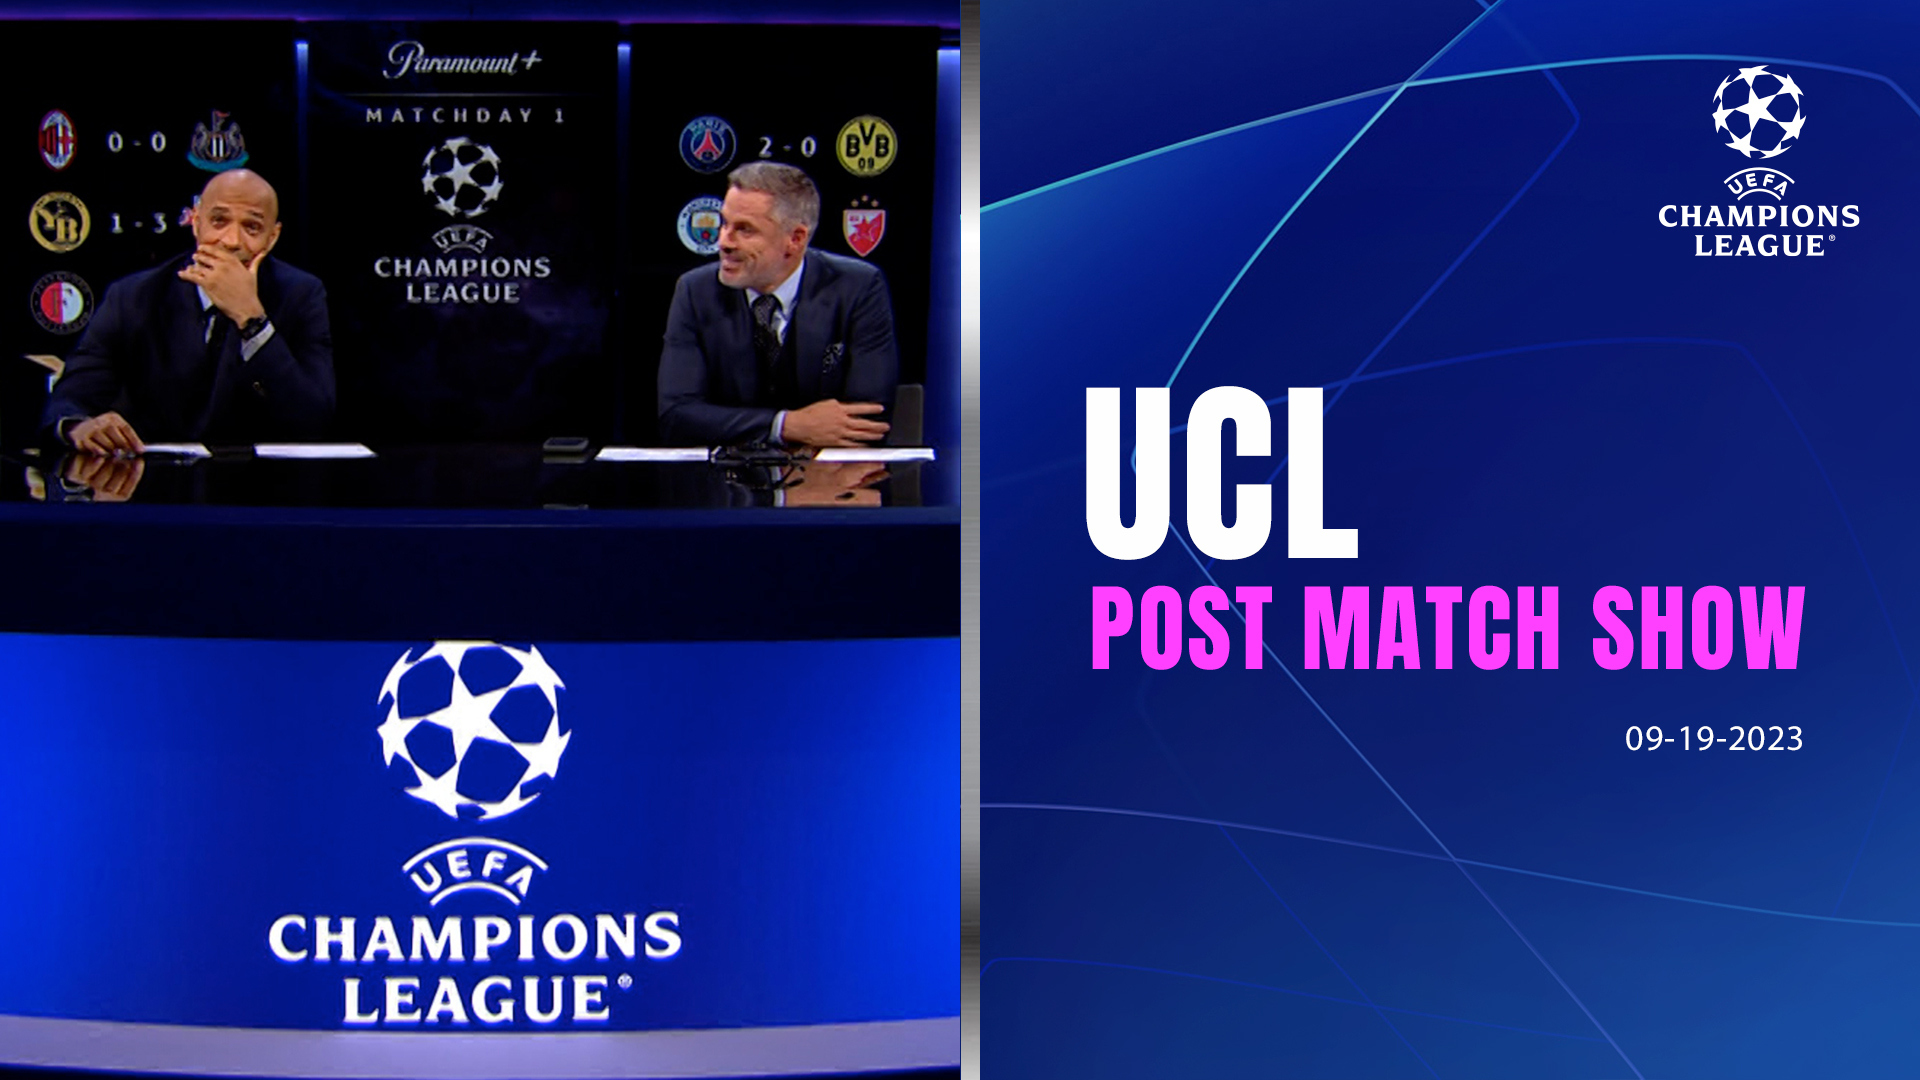 Watch UEFA Champions League Champions League Today Post Match Show - 09/19/2023